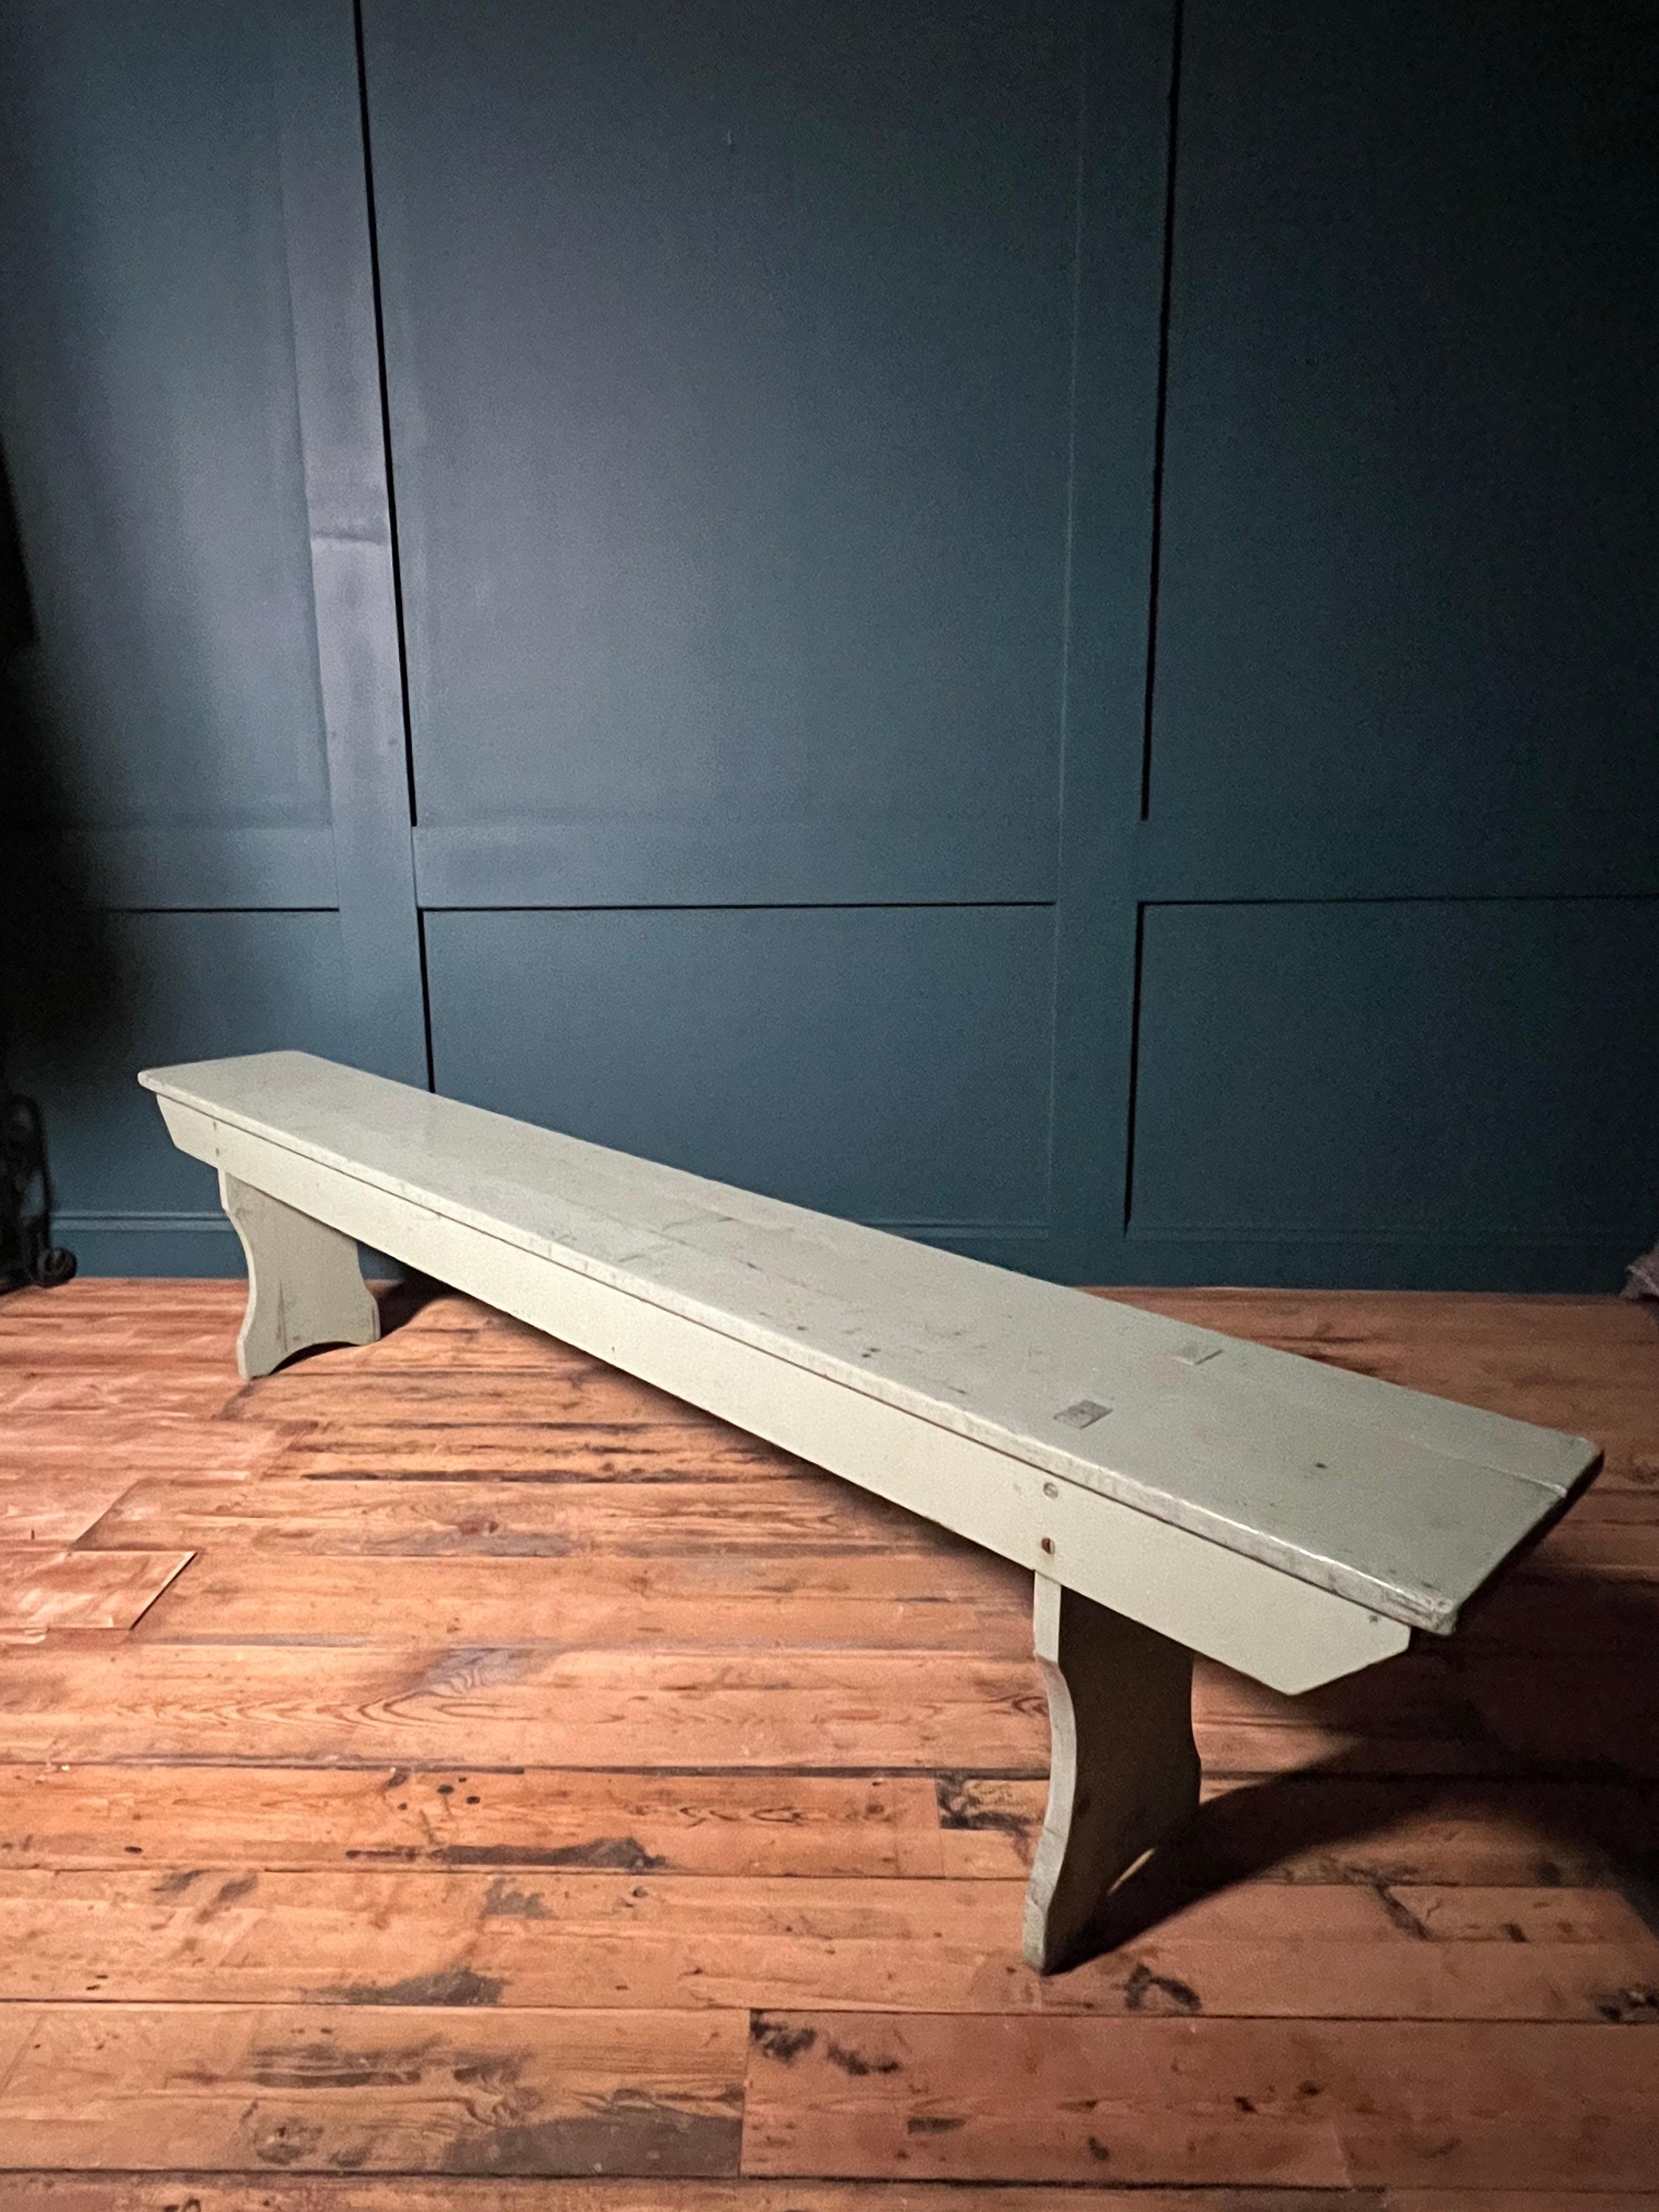 This charming painted Pine French Farmhouse long bench from the 1930's is a beautiful addition to any home. Made from sturdy pine wood, this bench exudes rustic charm with its distressed, pastel green painted finish. The long, narrow design is